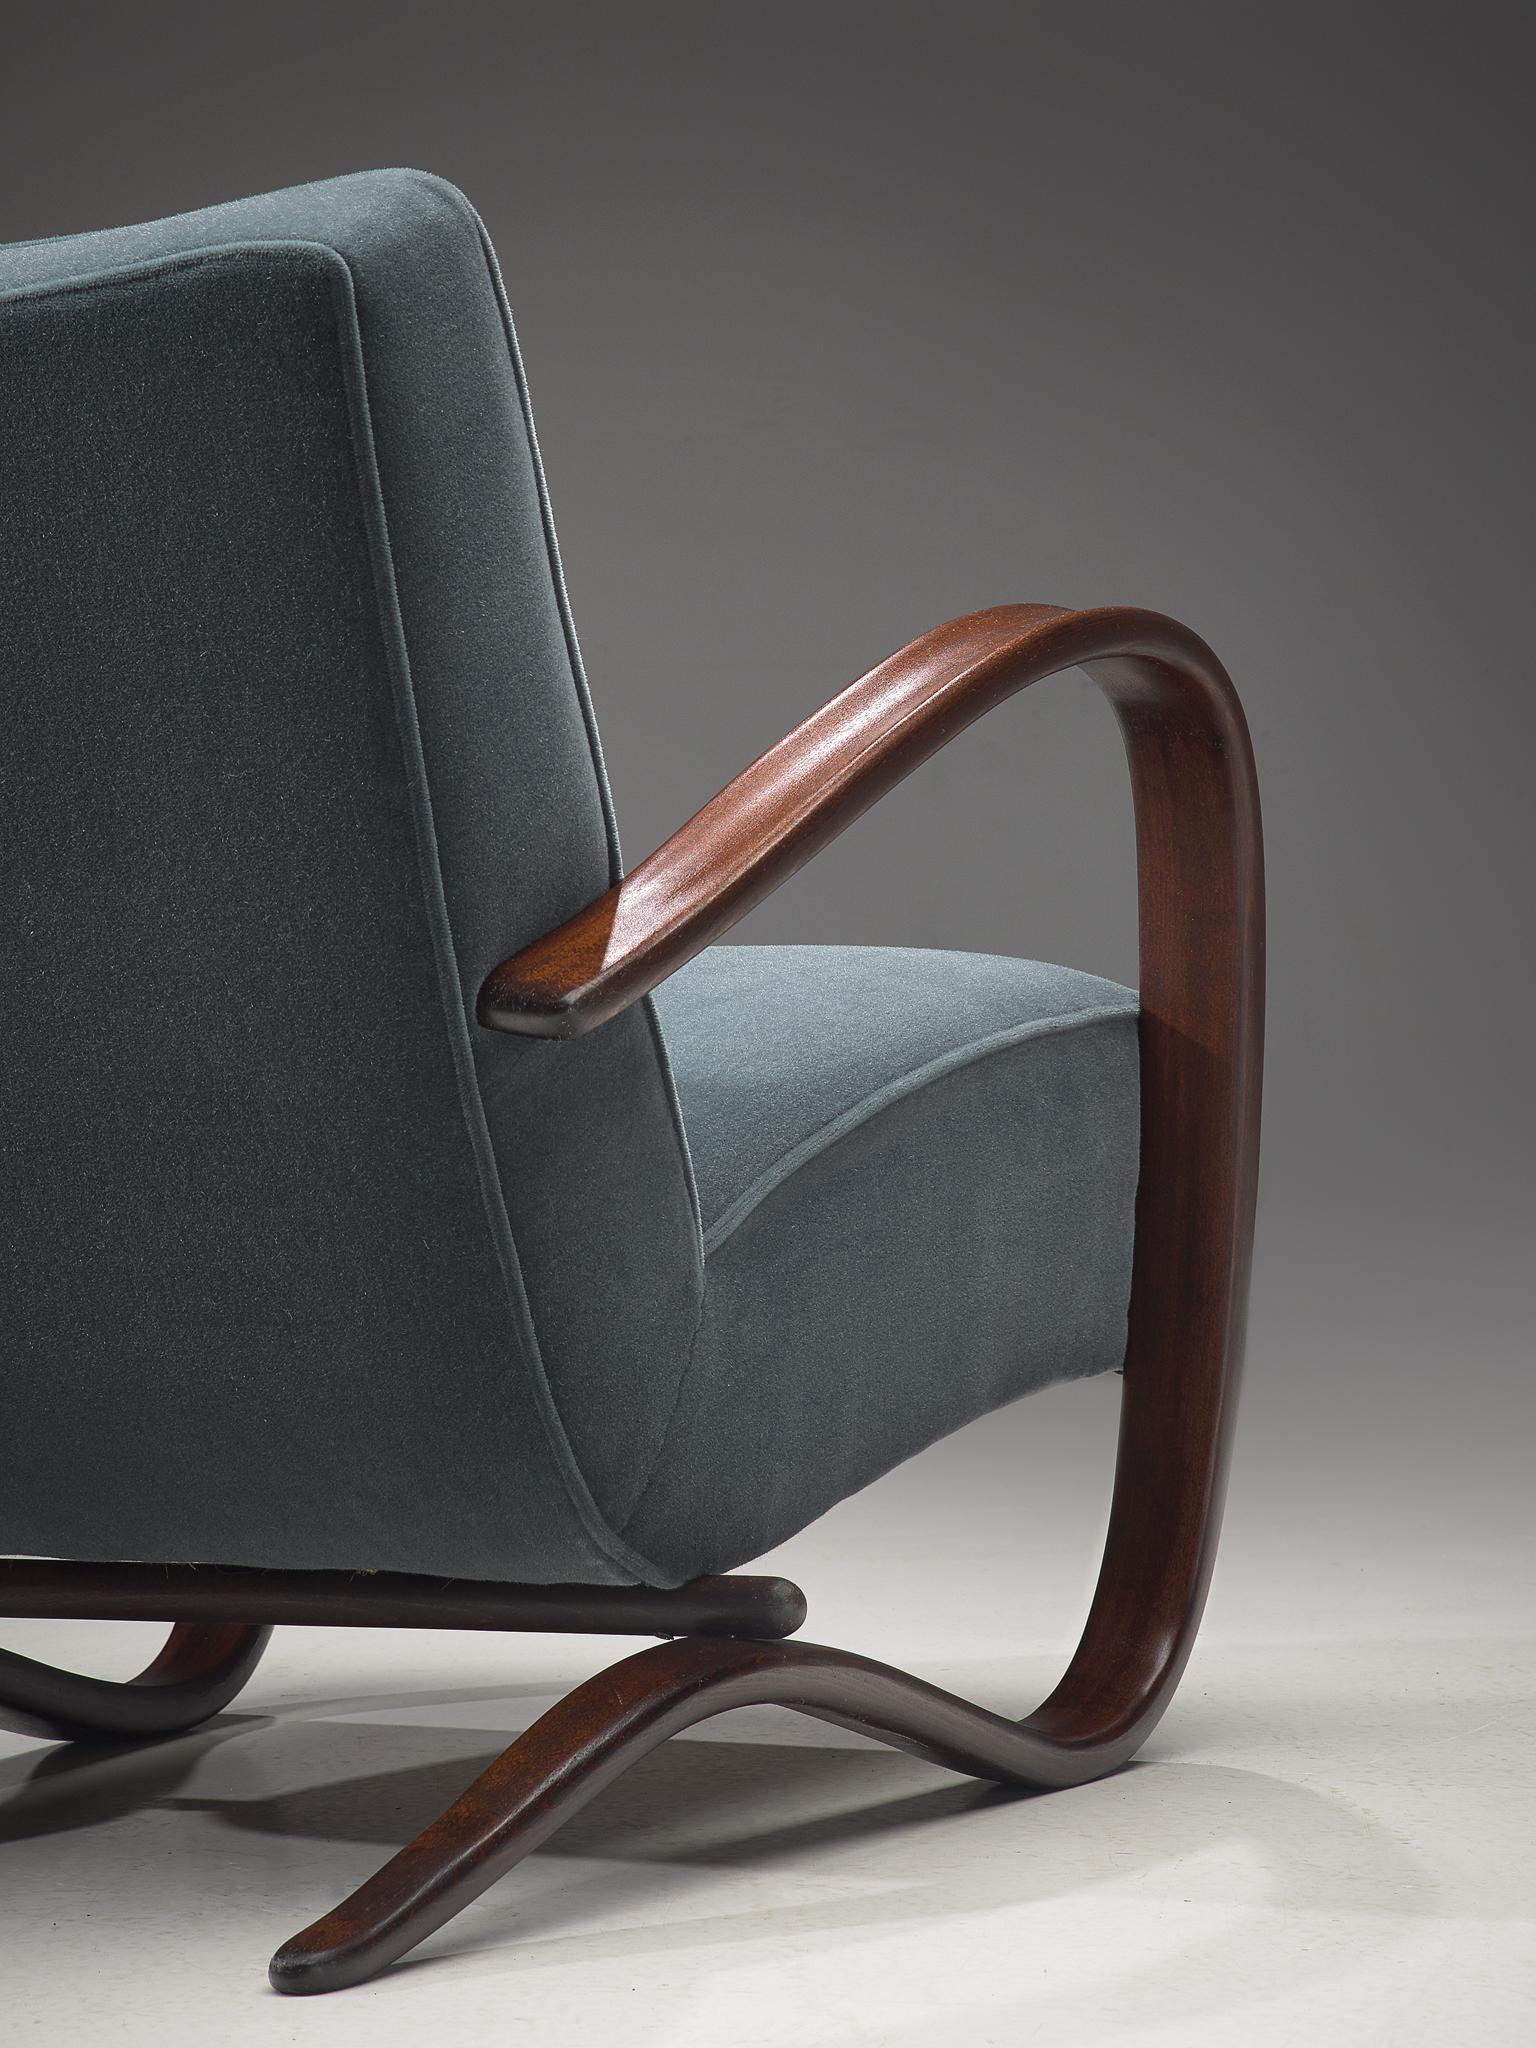 Mid-20th Century Customized Halabala Lounge Chair with Petrol Mohair Upholstery